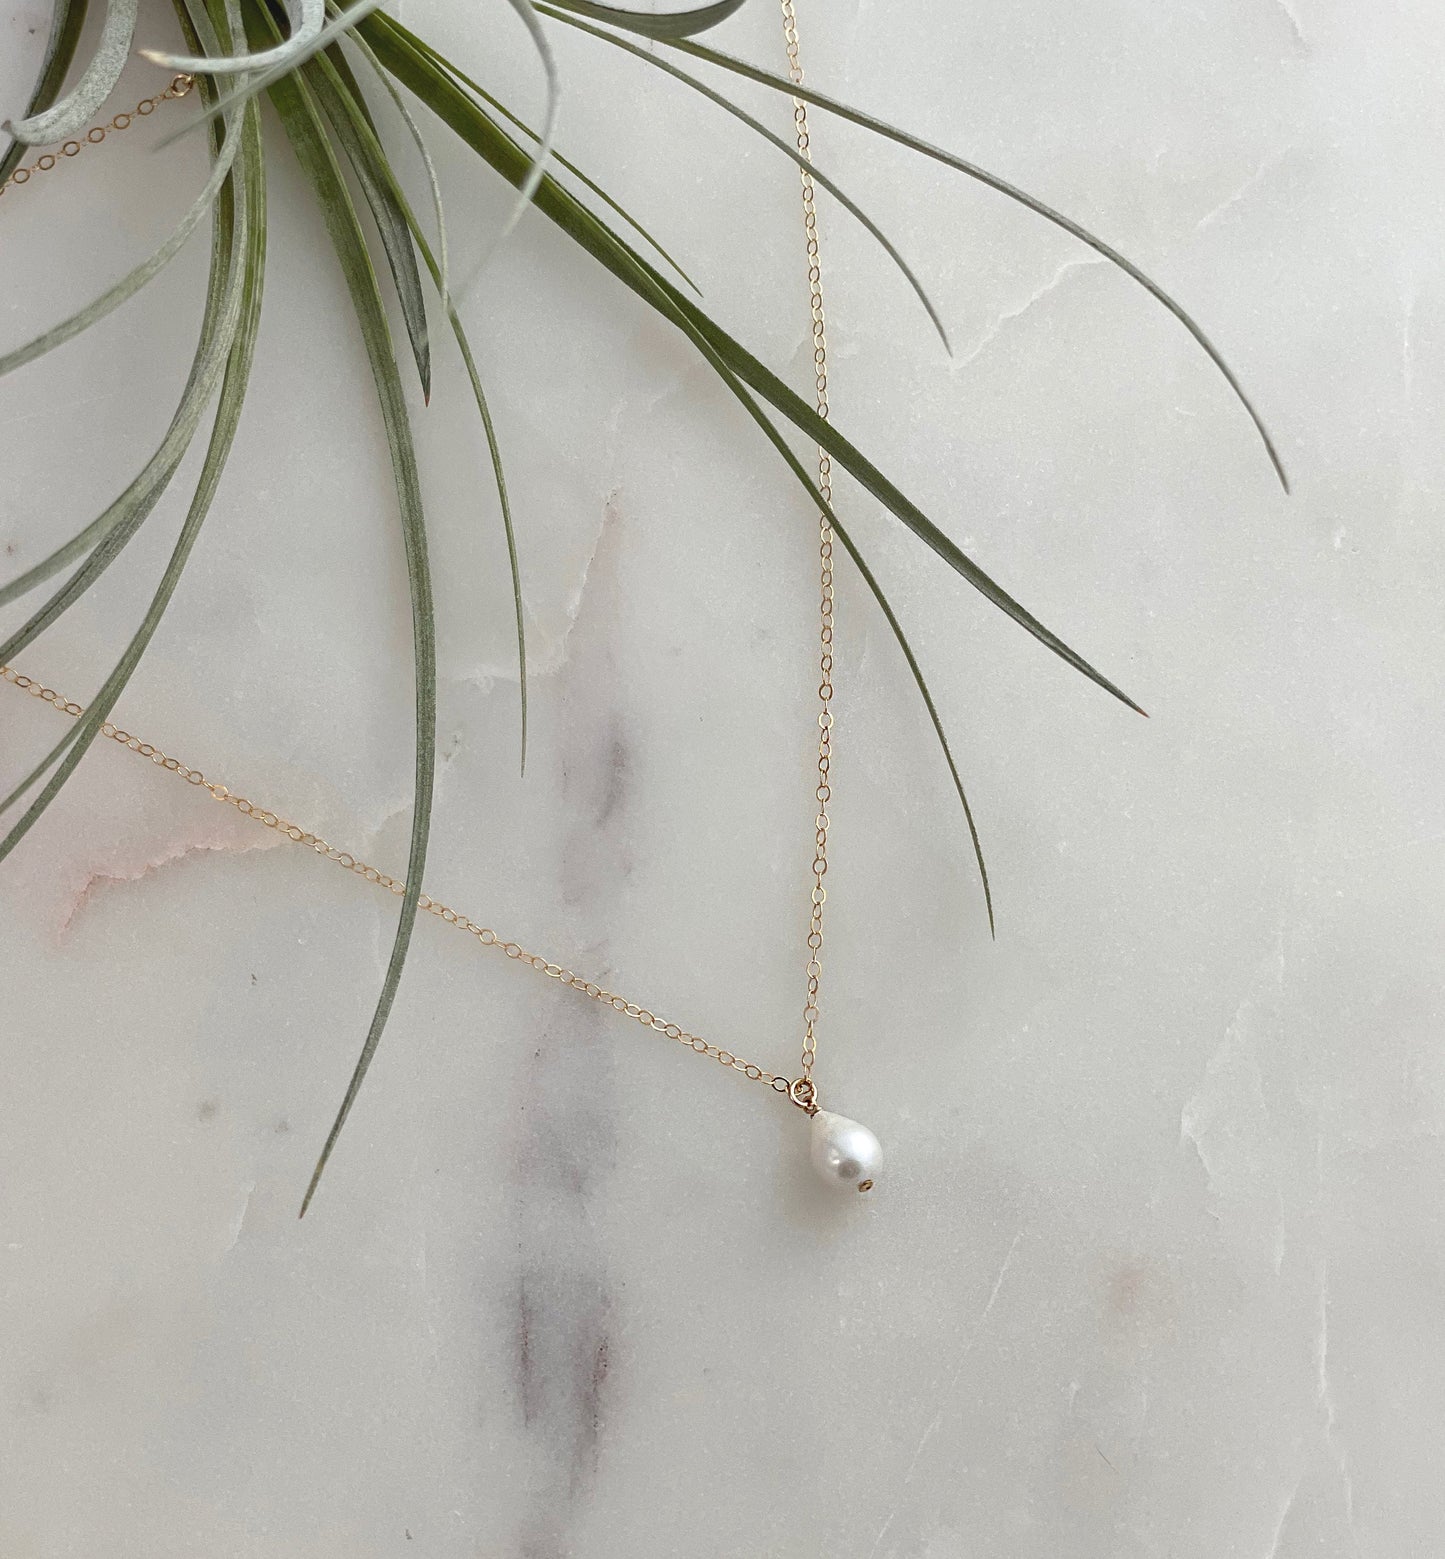 Mini Baroque Pearl Charm Necklace - White Freshwater Teardrop Pearl, 7-8mm Wide, 8-9mm long, 14k Gold Filled Chain